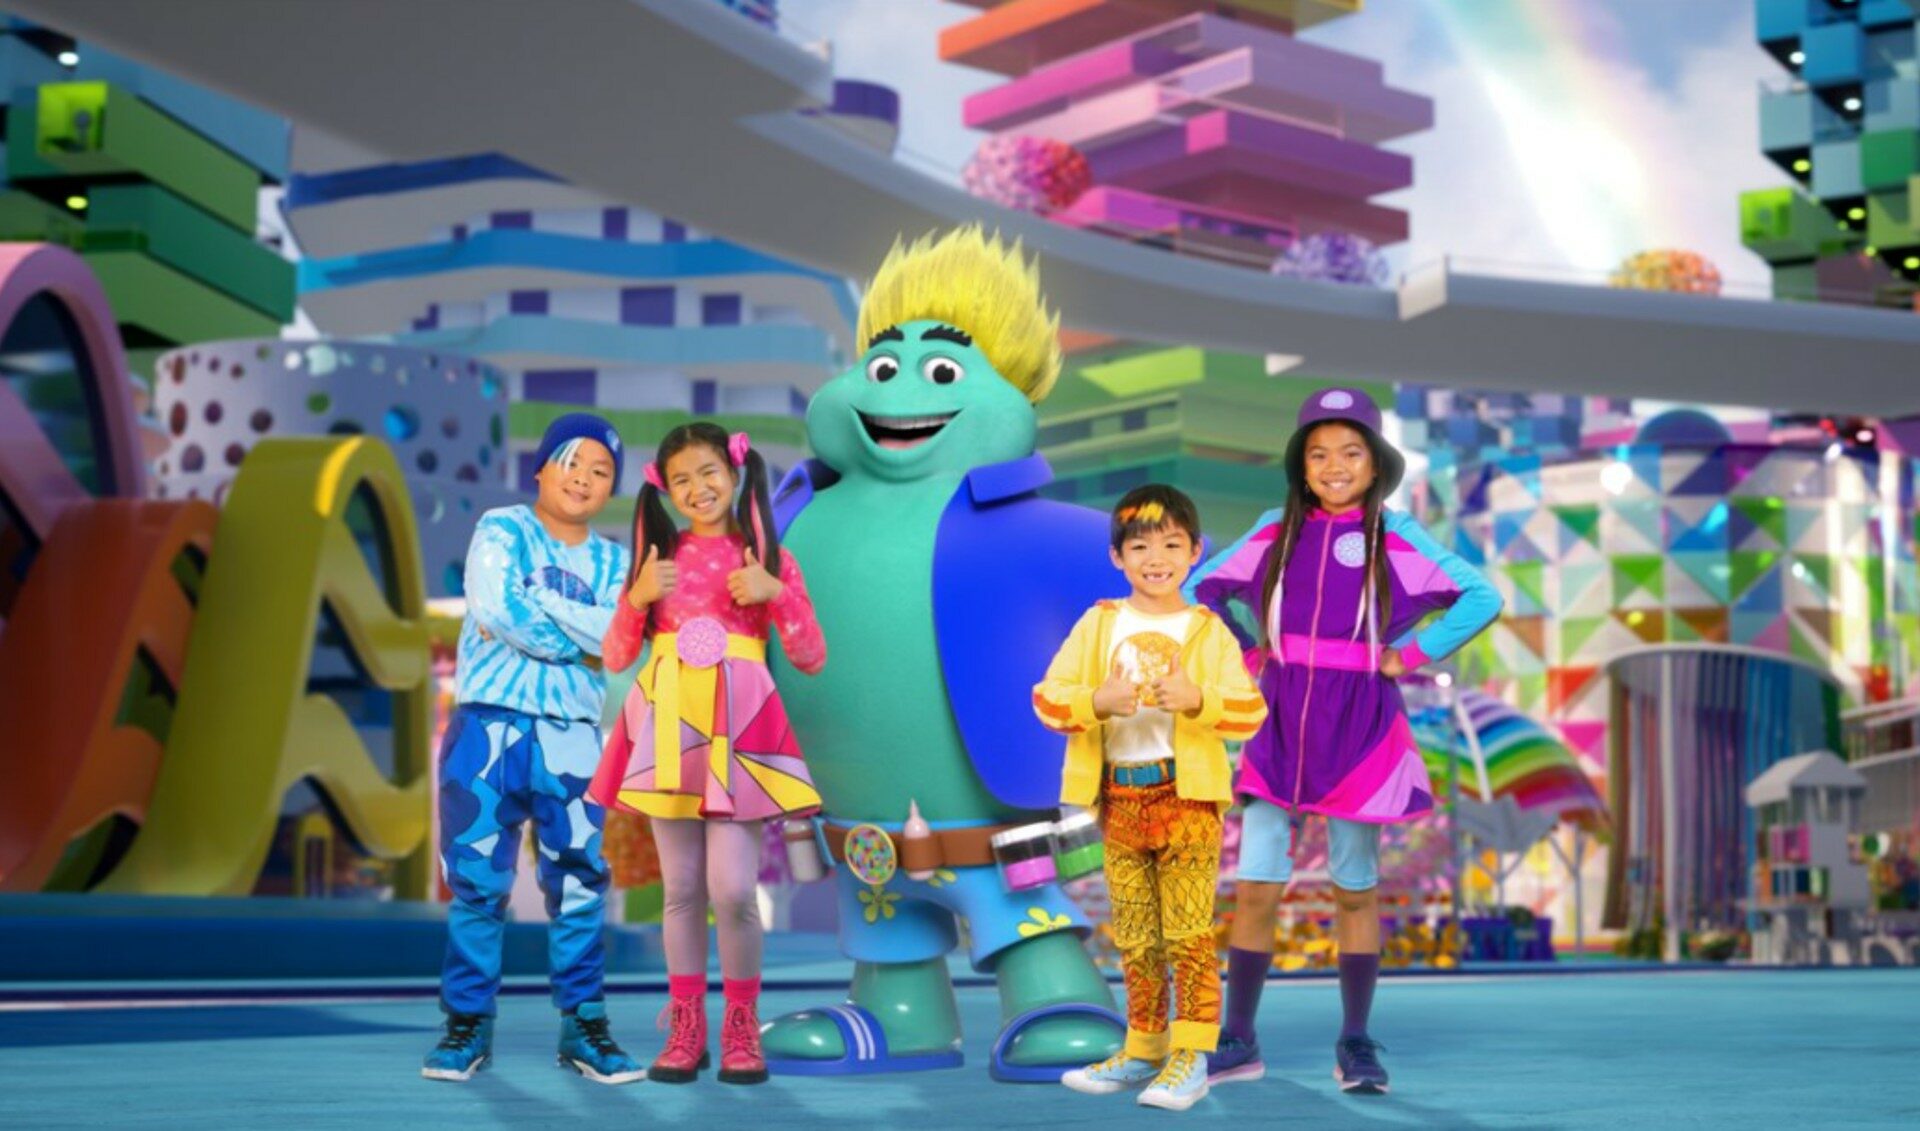 Pocket.watch Finds Latest Children’s Franchise In YouTube Goliath ‘Toys And Colors’